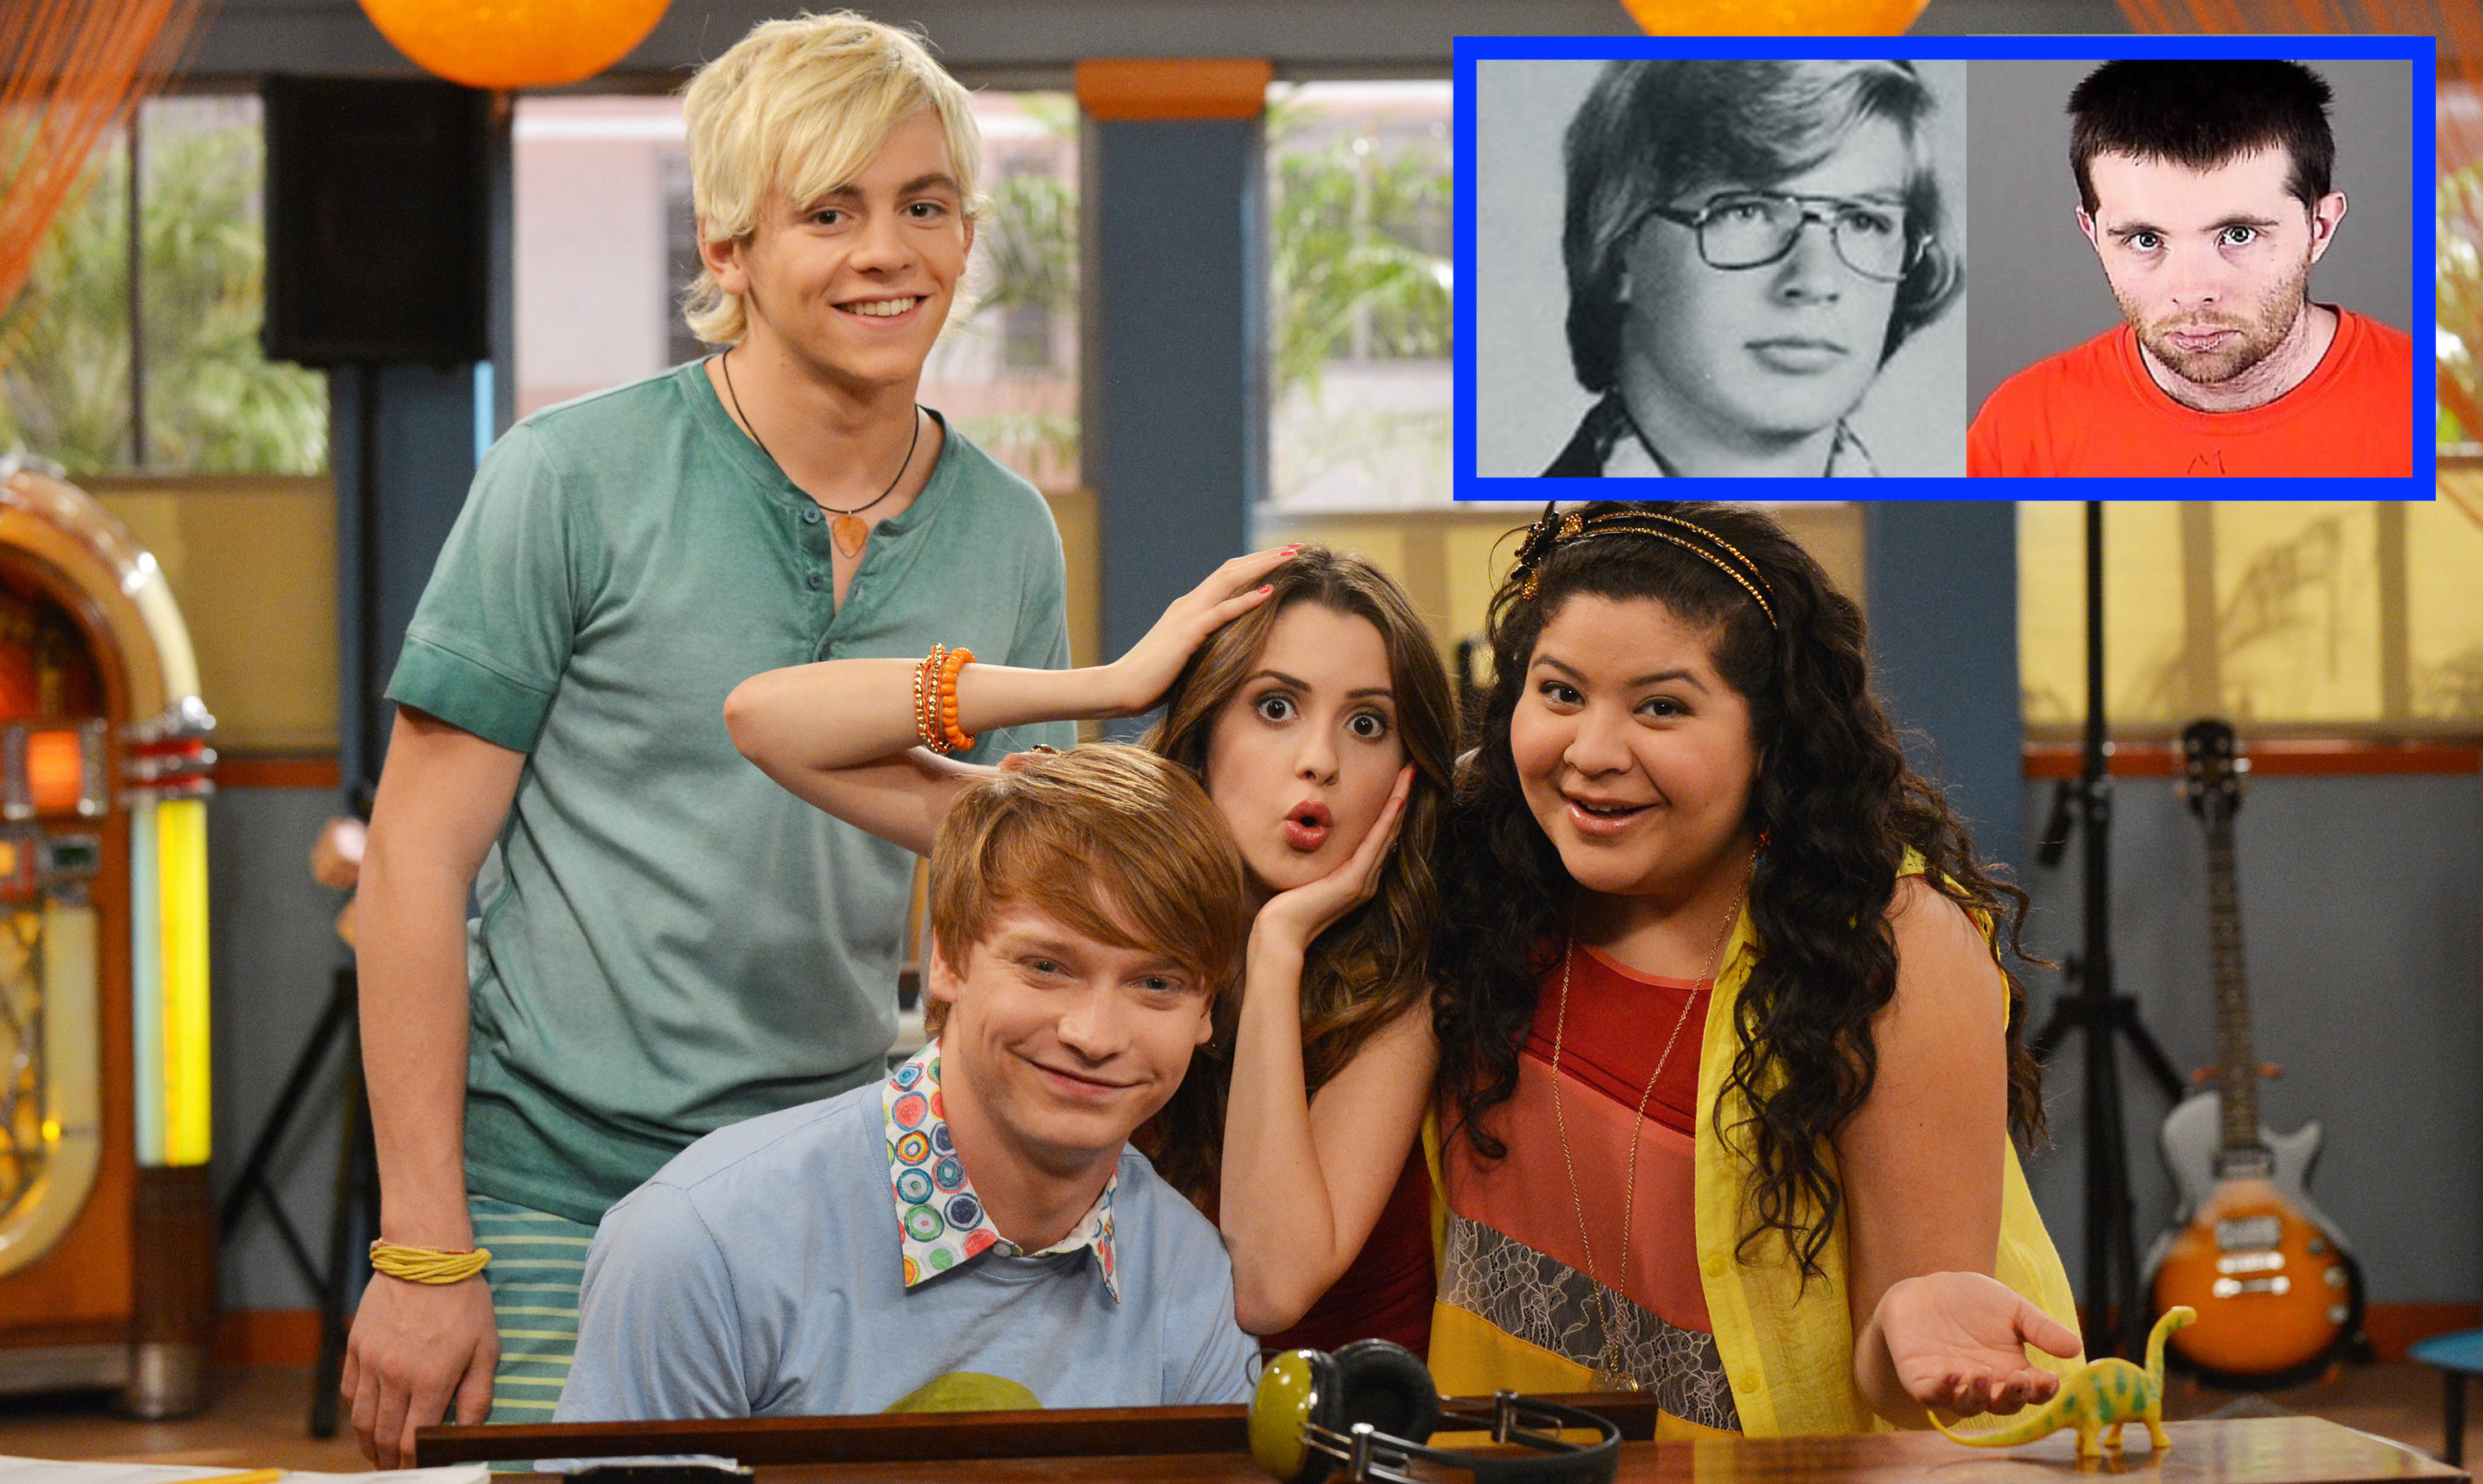 I’m pretty sure I just figured out what the hell is going on with the Austin & Ally boys.